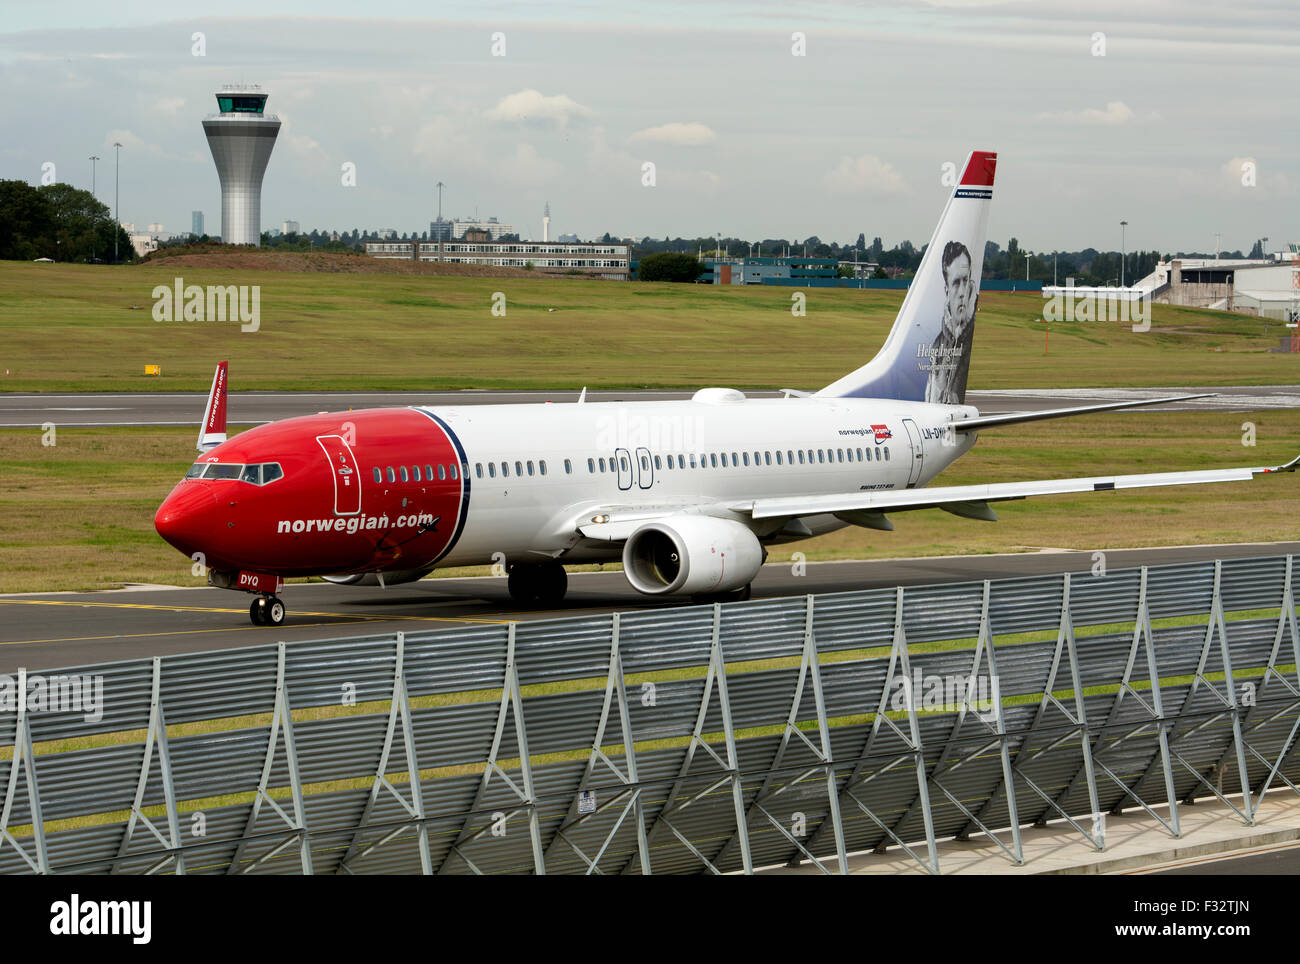 Norwegian Air Shuttle Boeing 737-800 (LN-DYQ) taxiing for take off at Birmingham Airport, UK Stock Photo